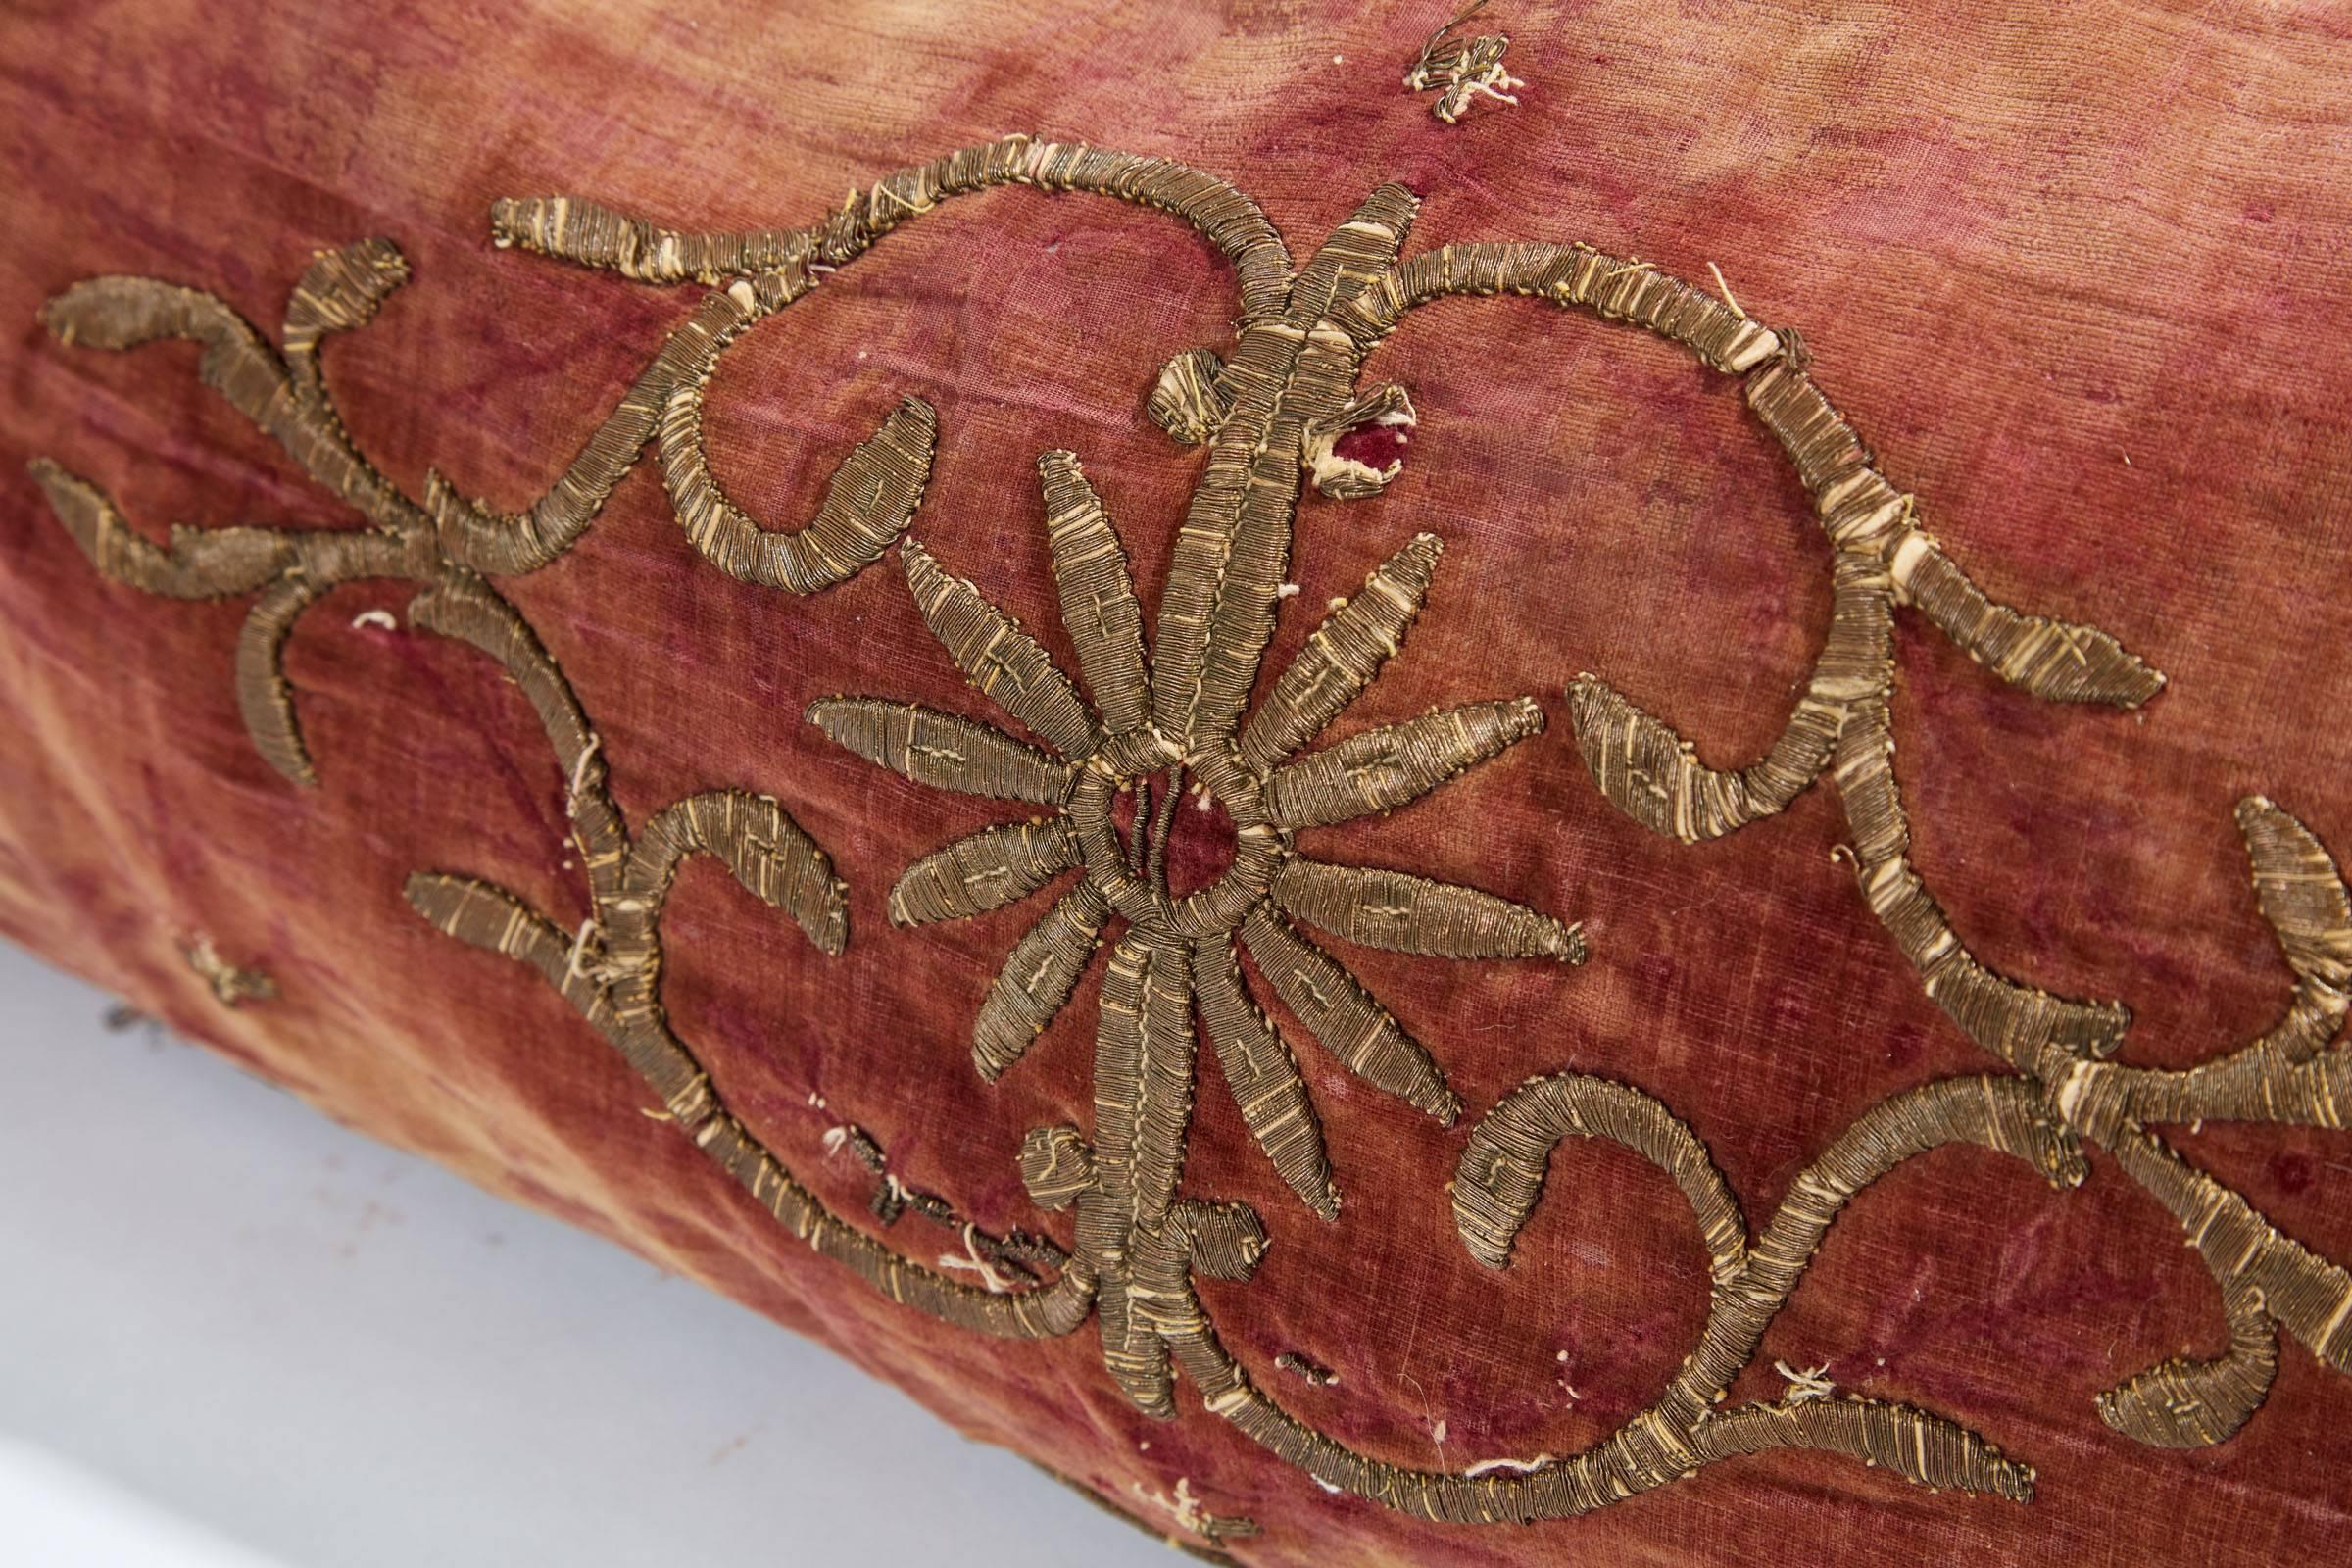 17th century Turkish ottoman Empire velvet and gold embroidered pillow sham.